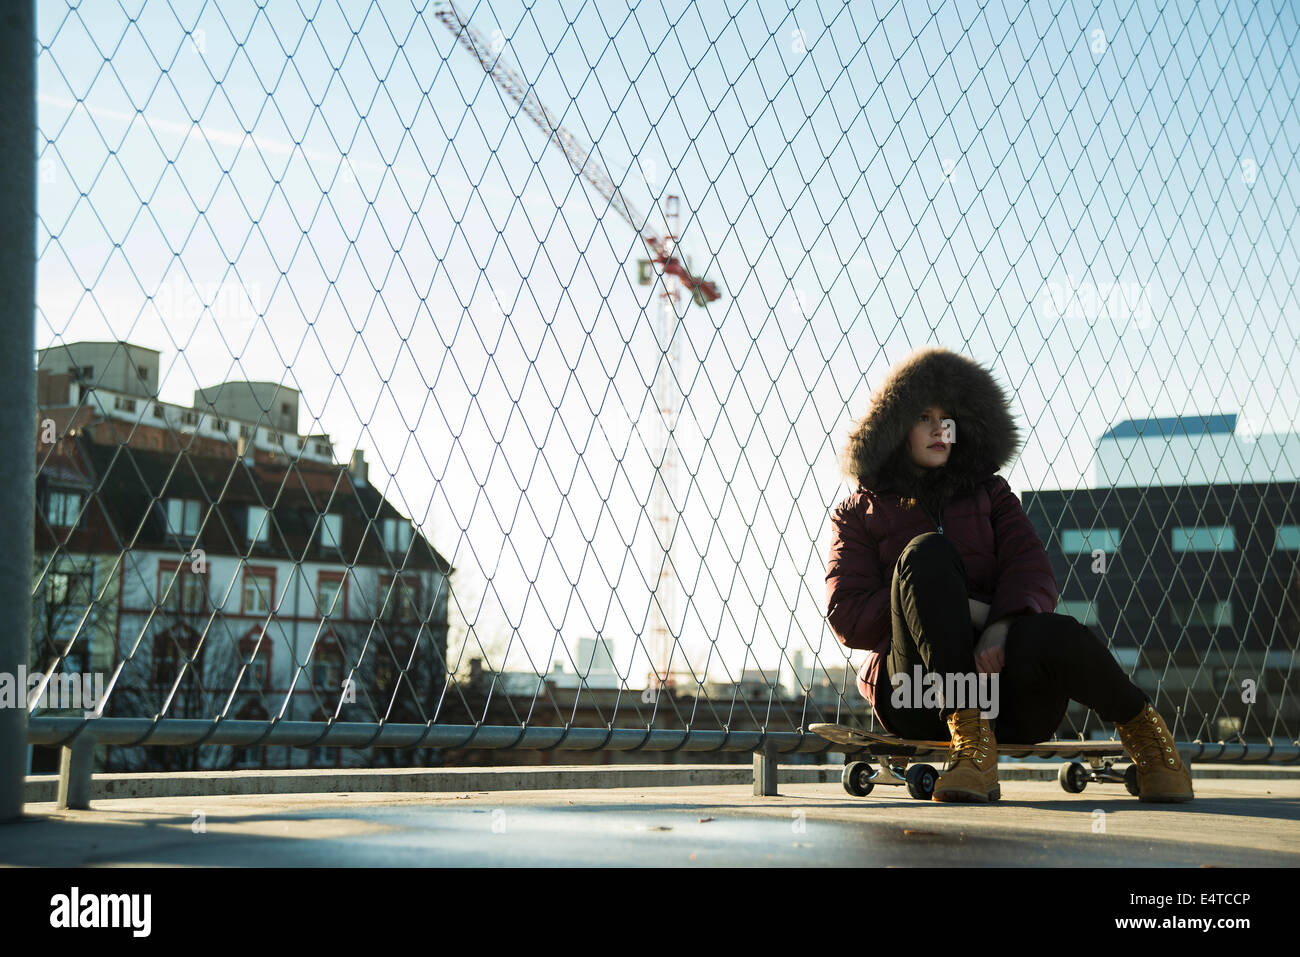 Teenage girl wearing winter coat, sitting on skateboard outdoors, next to chain link fence near comercial dock, Germany Stock Photo